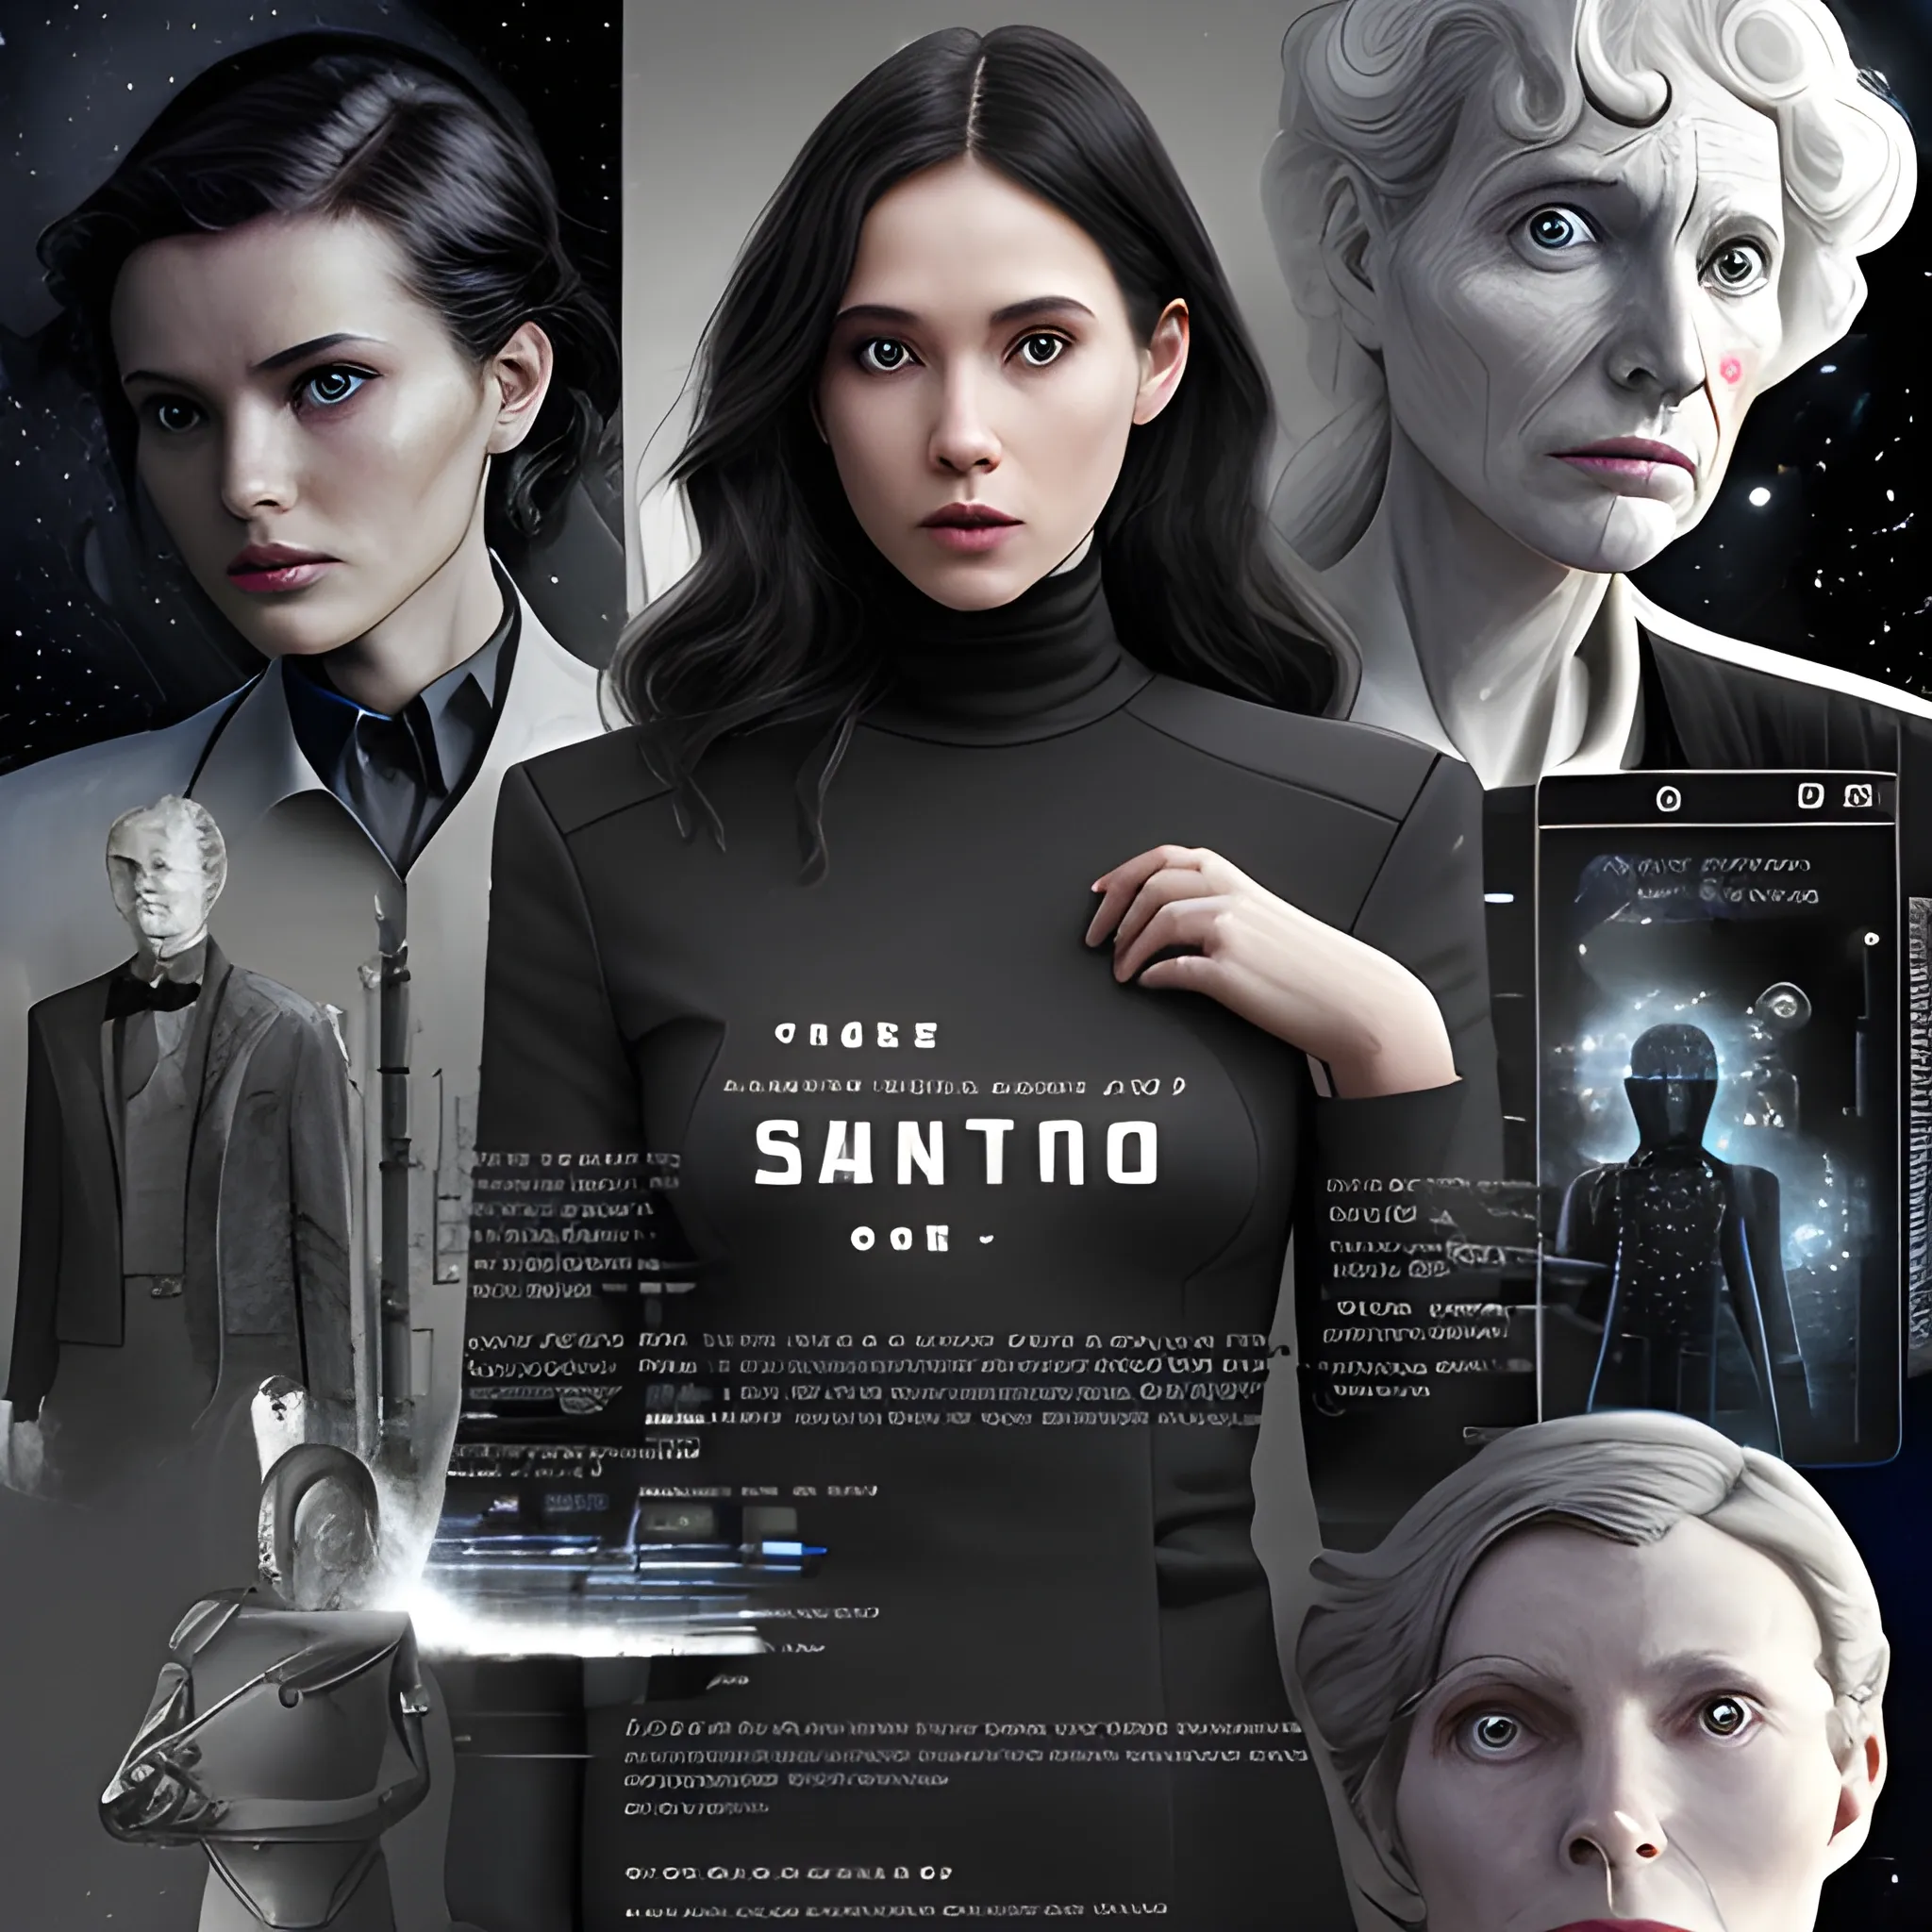 Science fiction, a sense of technology, cross-border e-commerce, gray and black tones, and a sense of movie sophistication